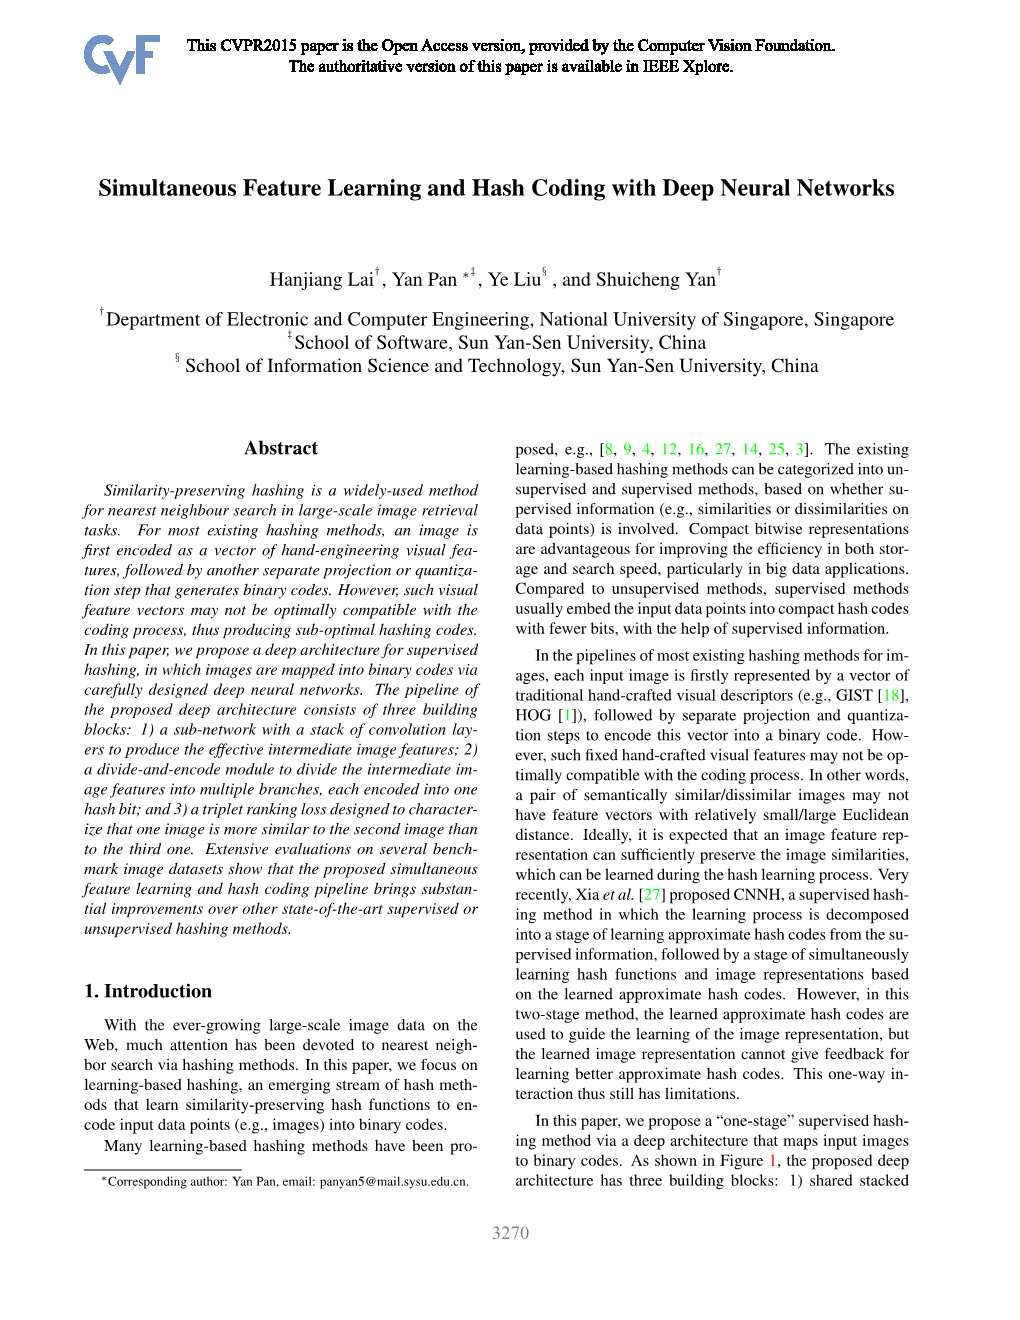 Simultaneous Feature Learning and Hash Coding with Deep Neural Networks